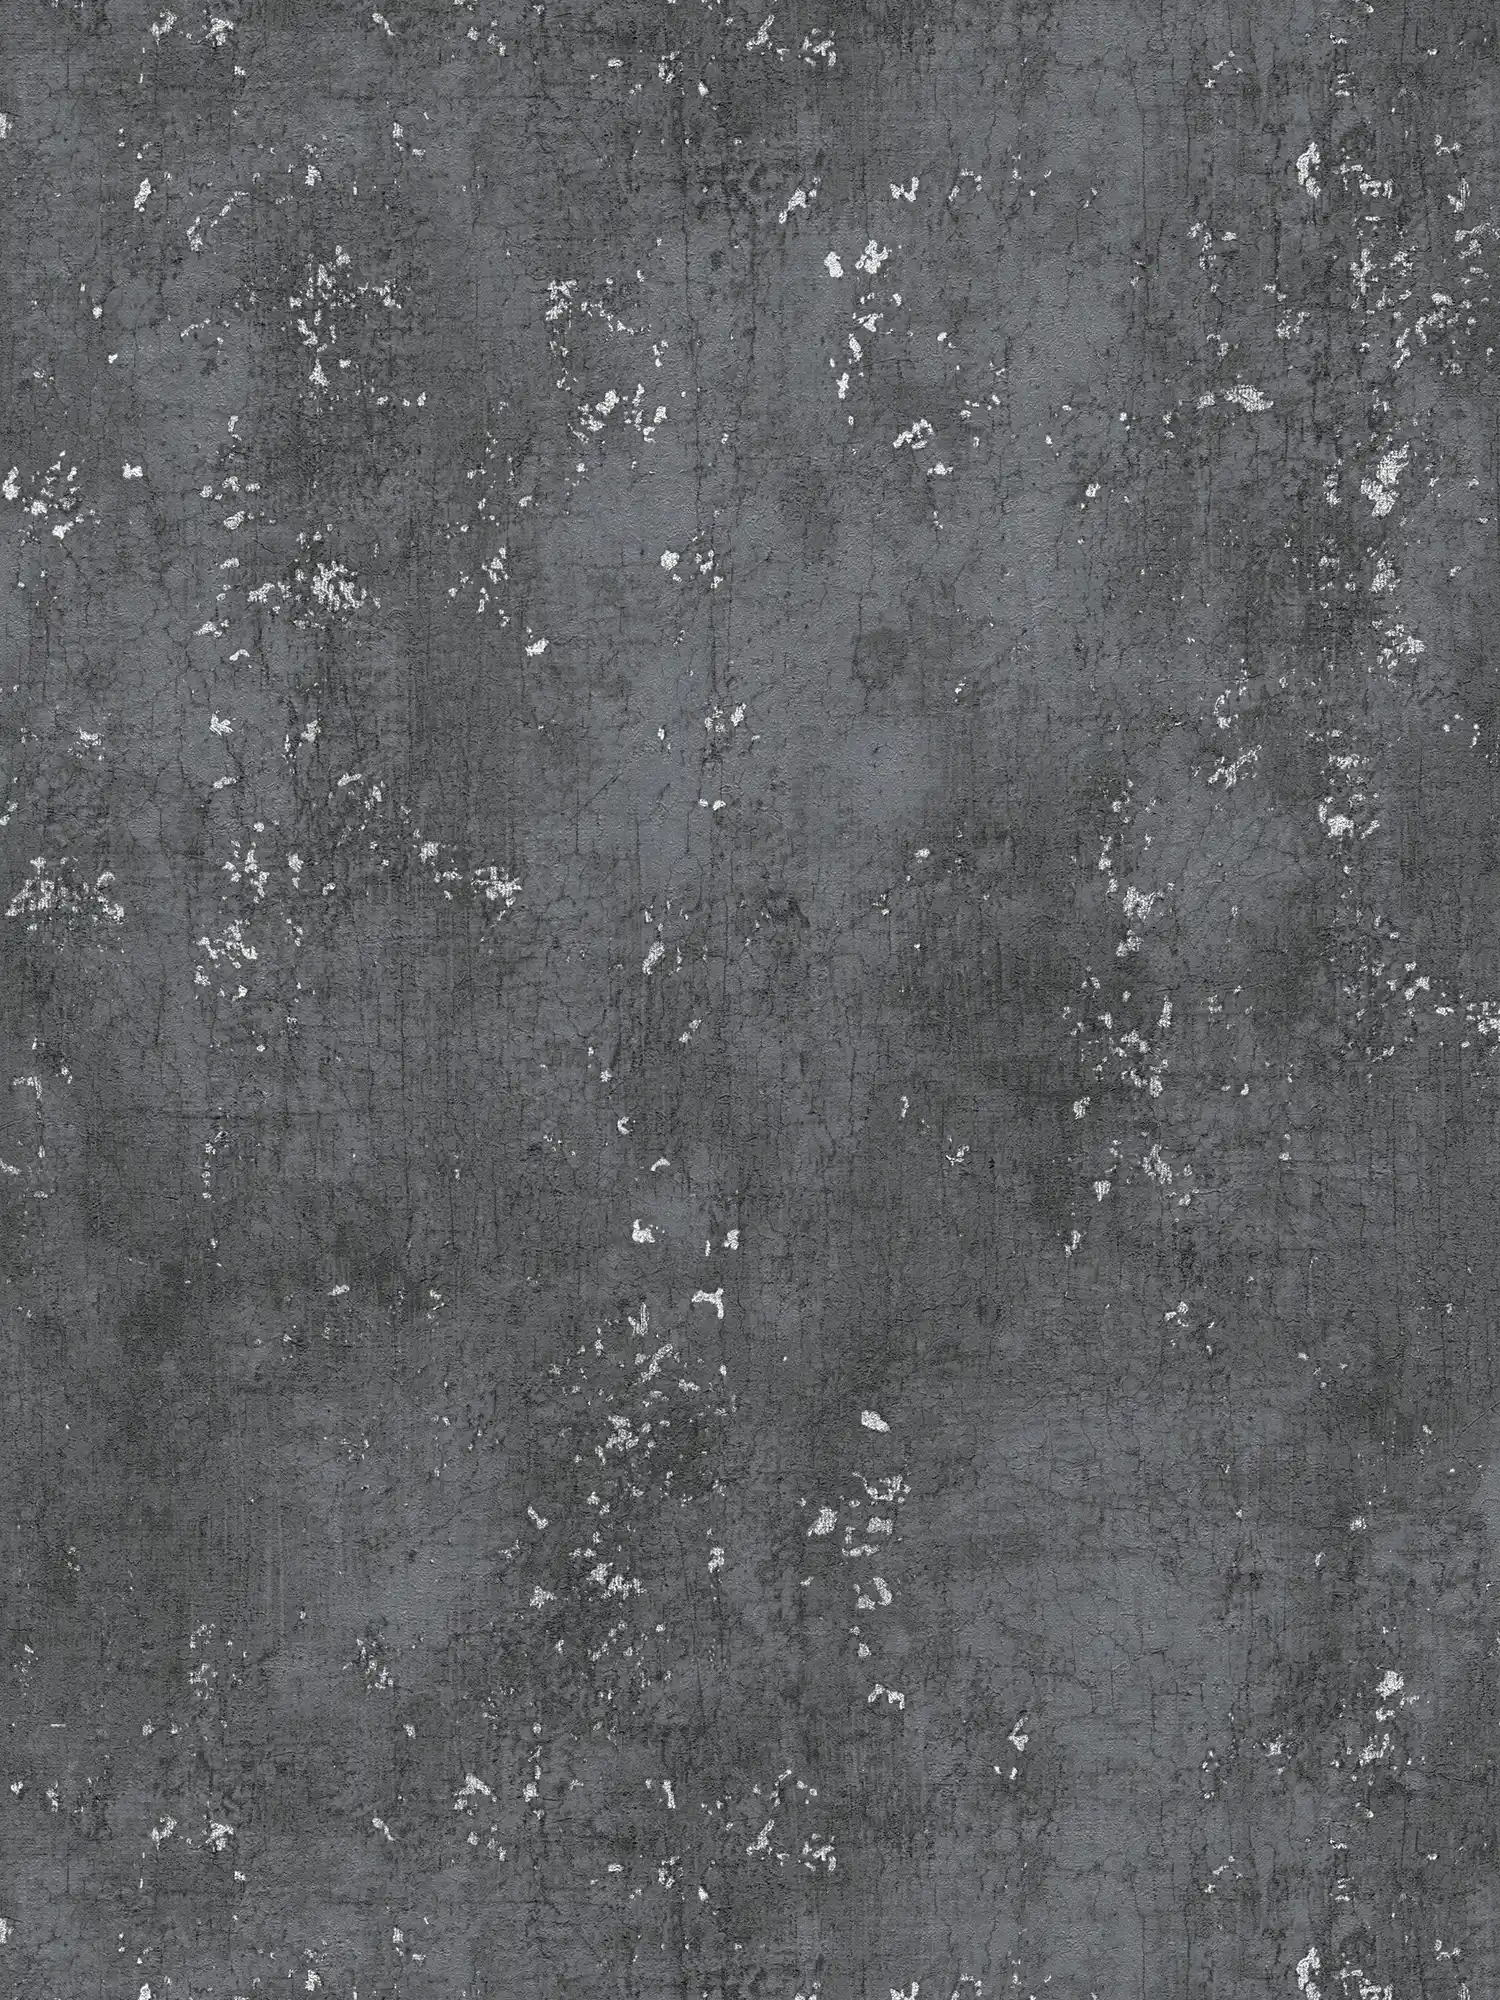 Anthracite wallpaper plaster look with silver crackle - grey, metallic, black
